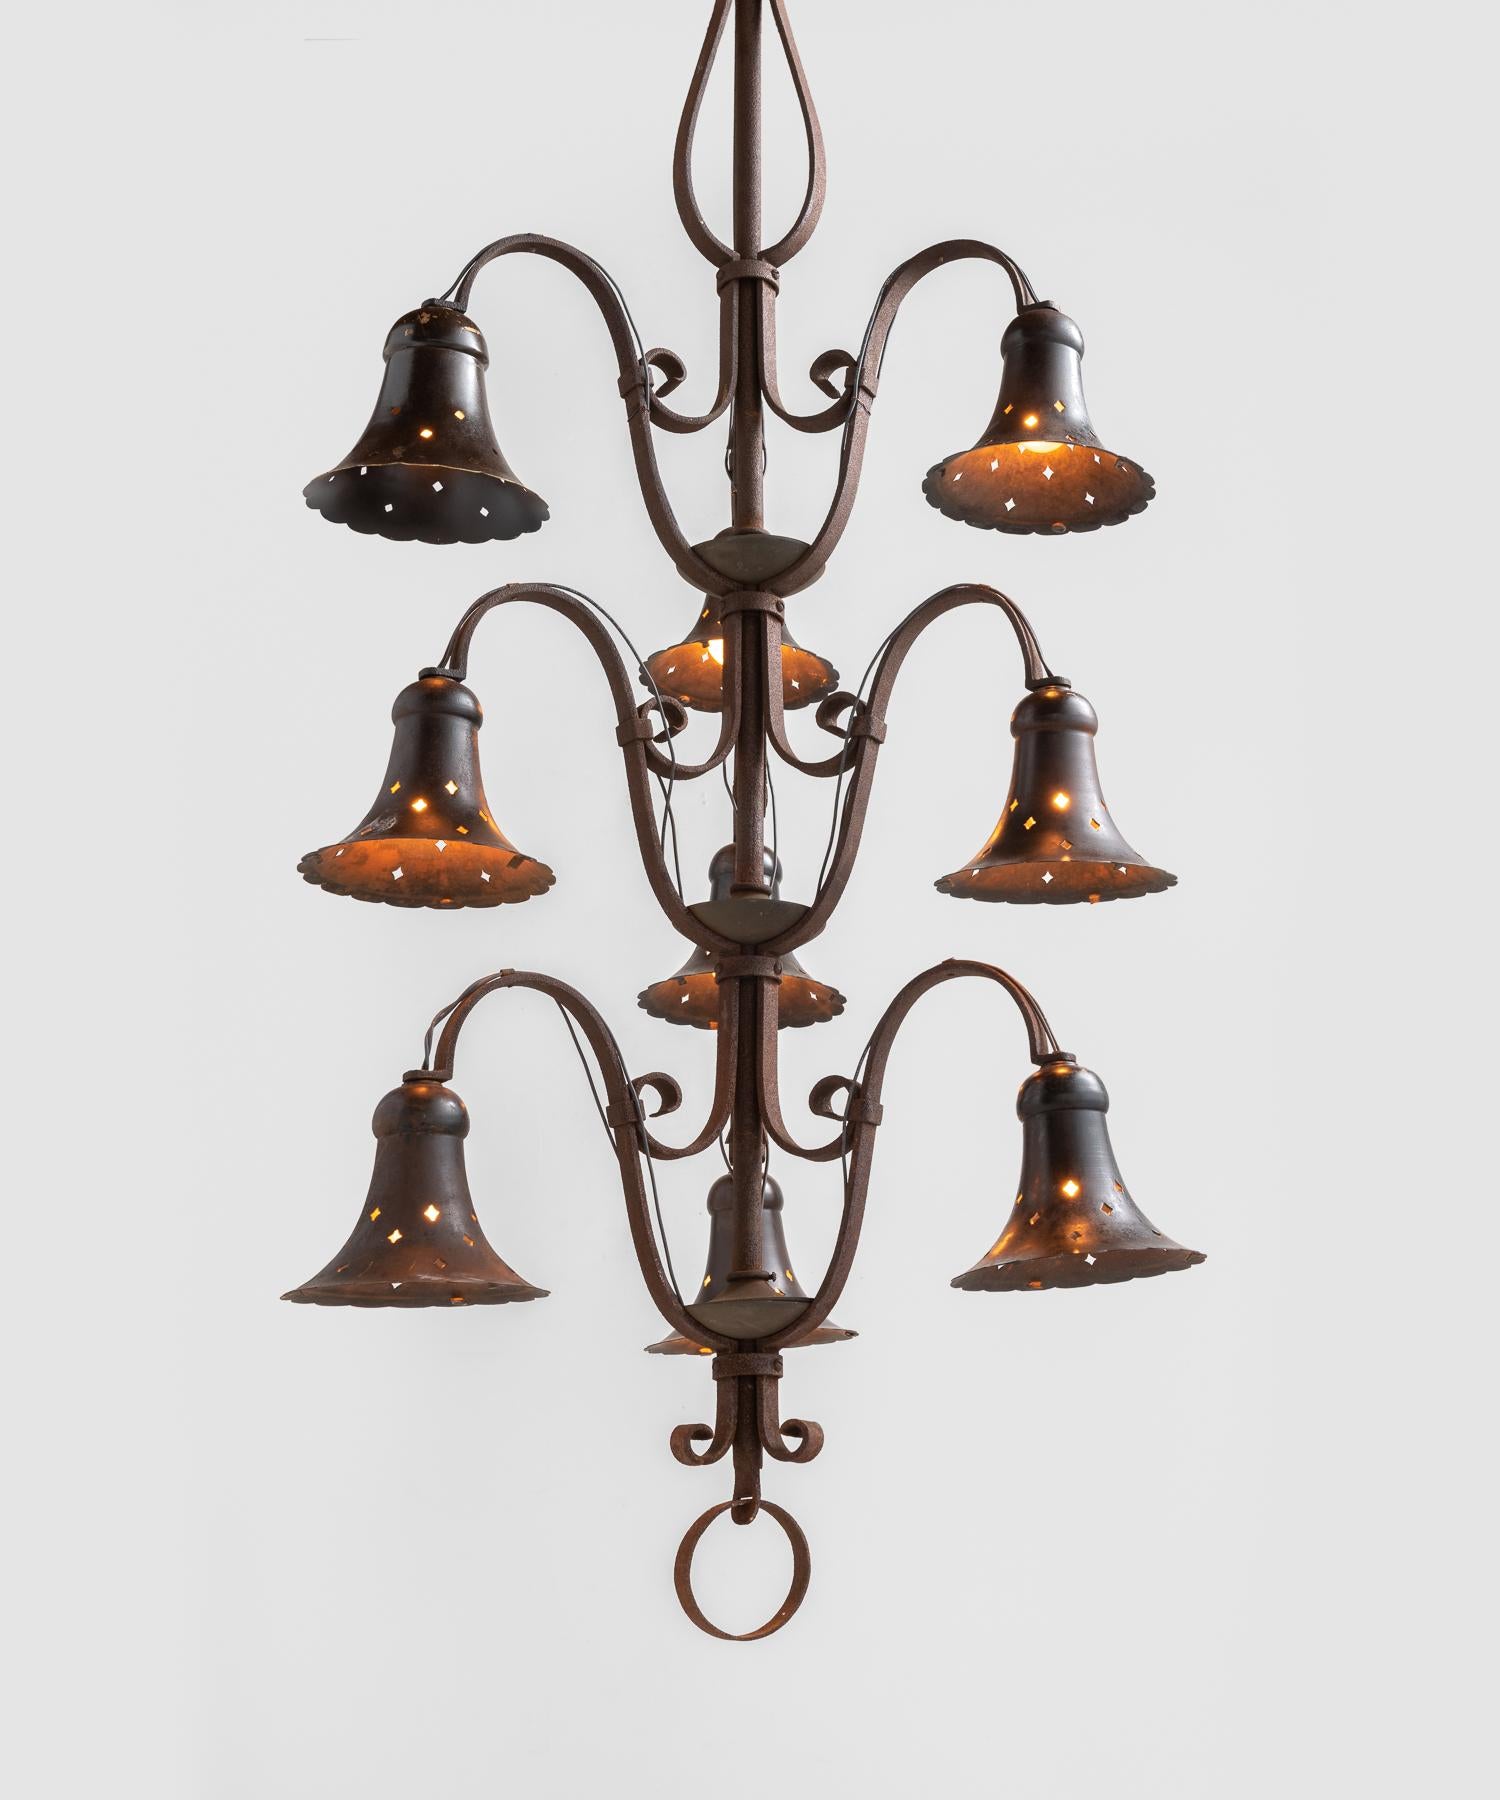 Wrought Iron Bell Chandelier, America, circa 1940

Nine-arm fixture with elegant perforated bell shades.